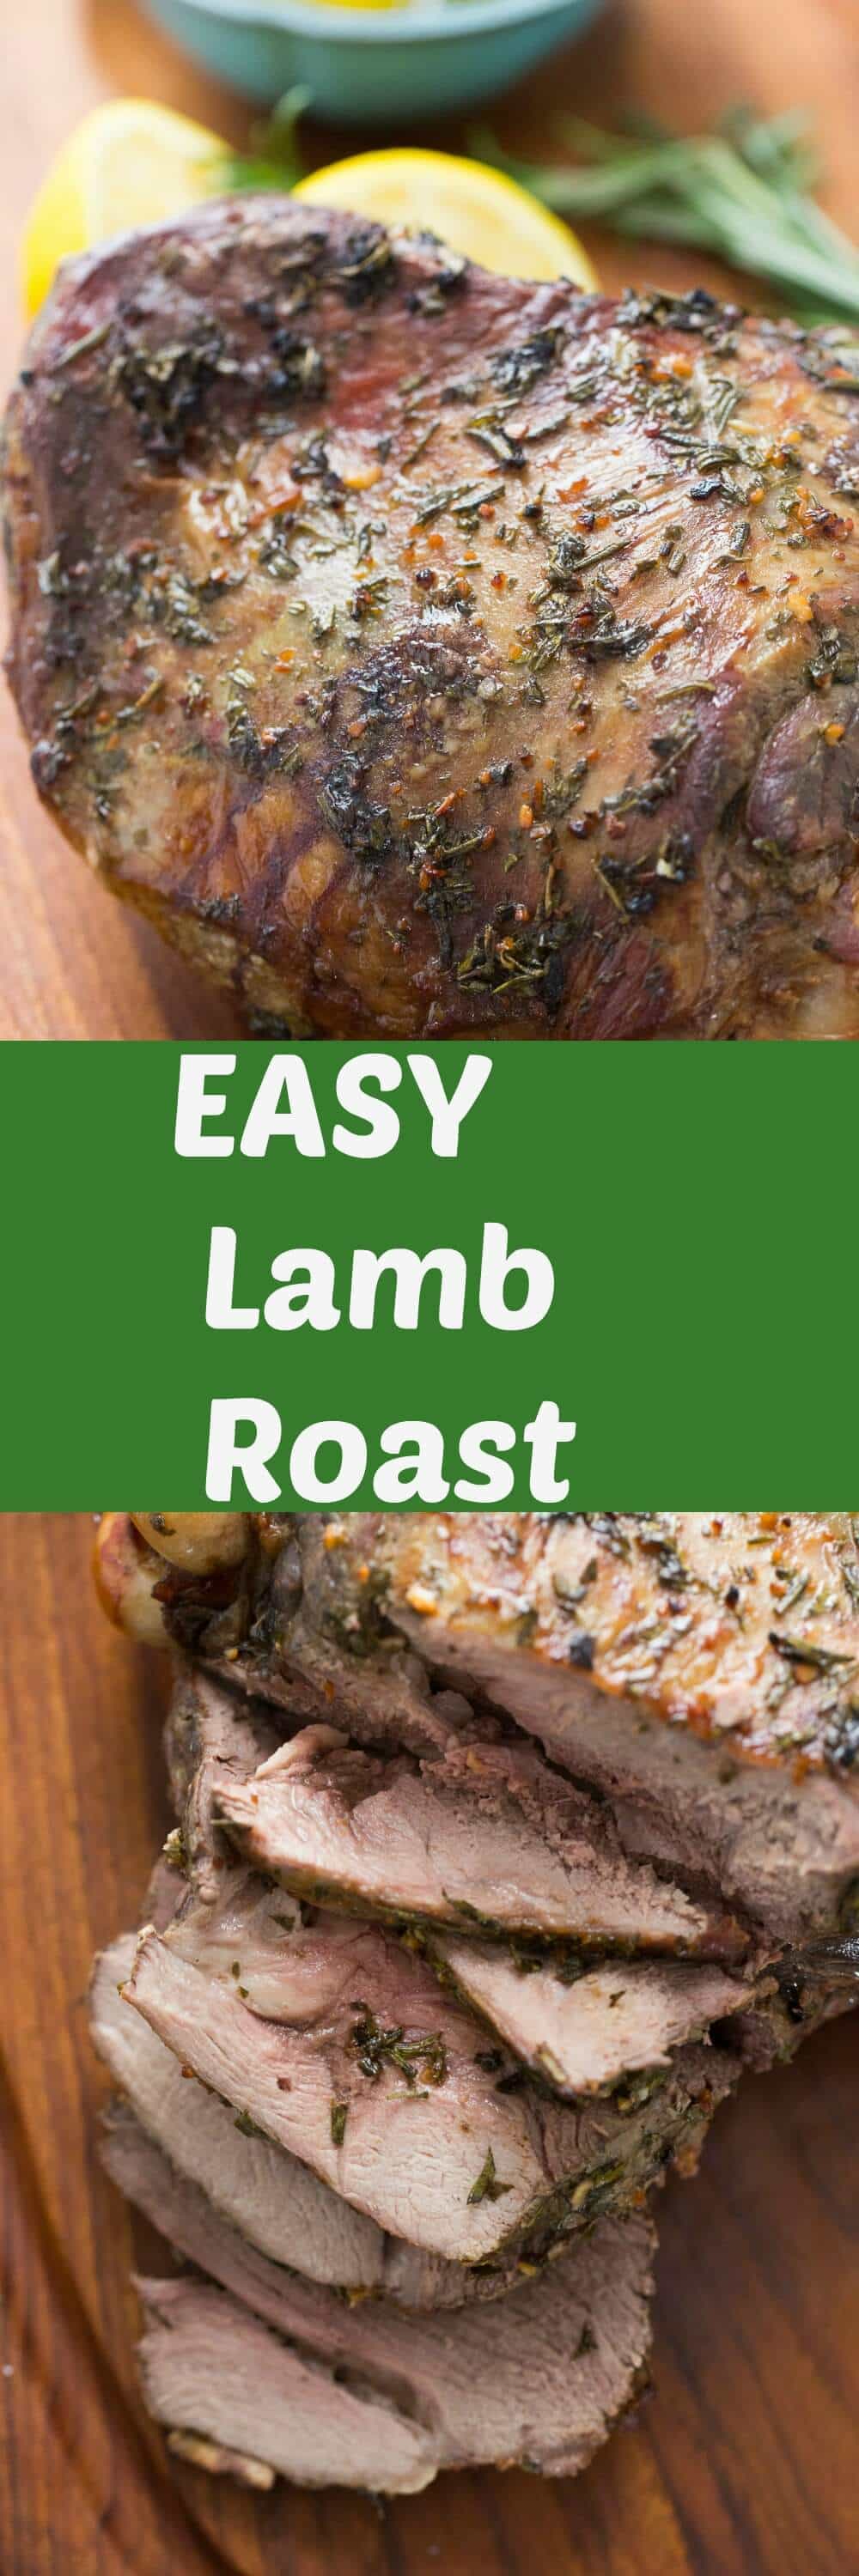 This easy lamb roast will be a hit! This is roast is well seasoning and cooked low and slow for tender meat that melts in your mouth!